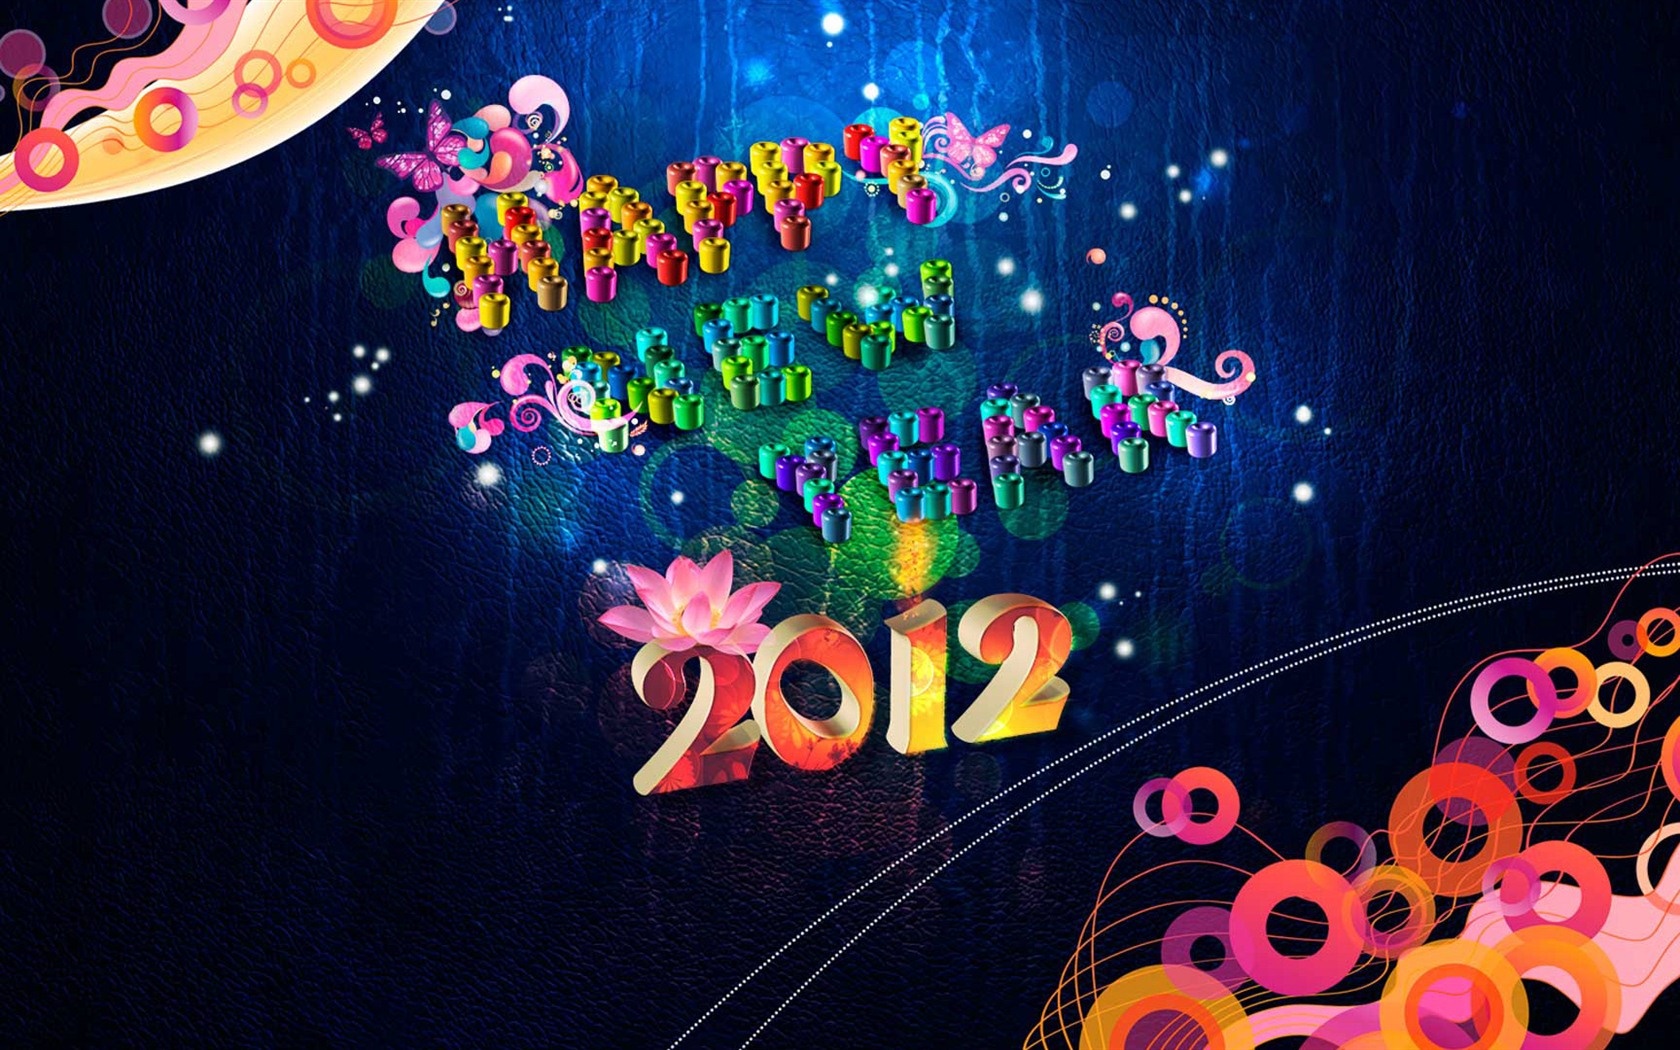 2012 New Year wallpapers (2) #3 - 1680x1050